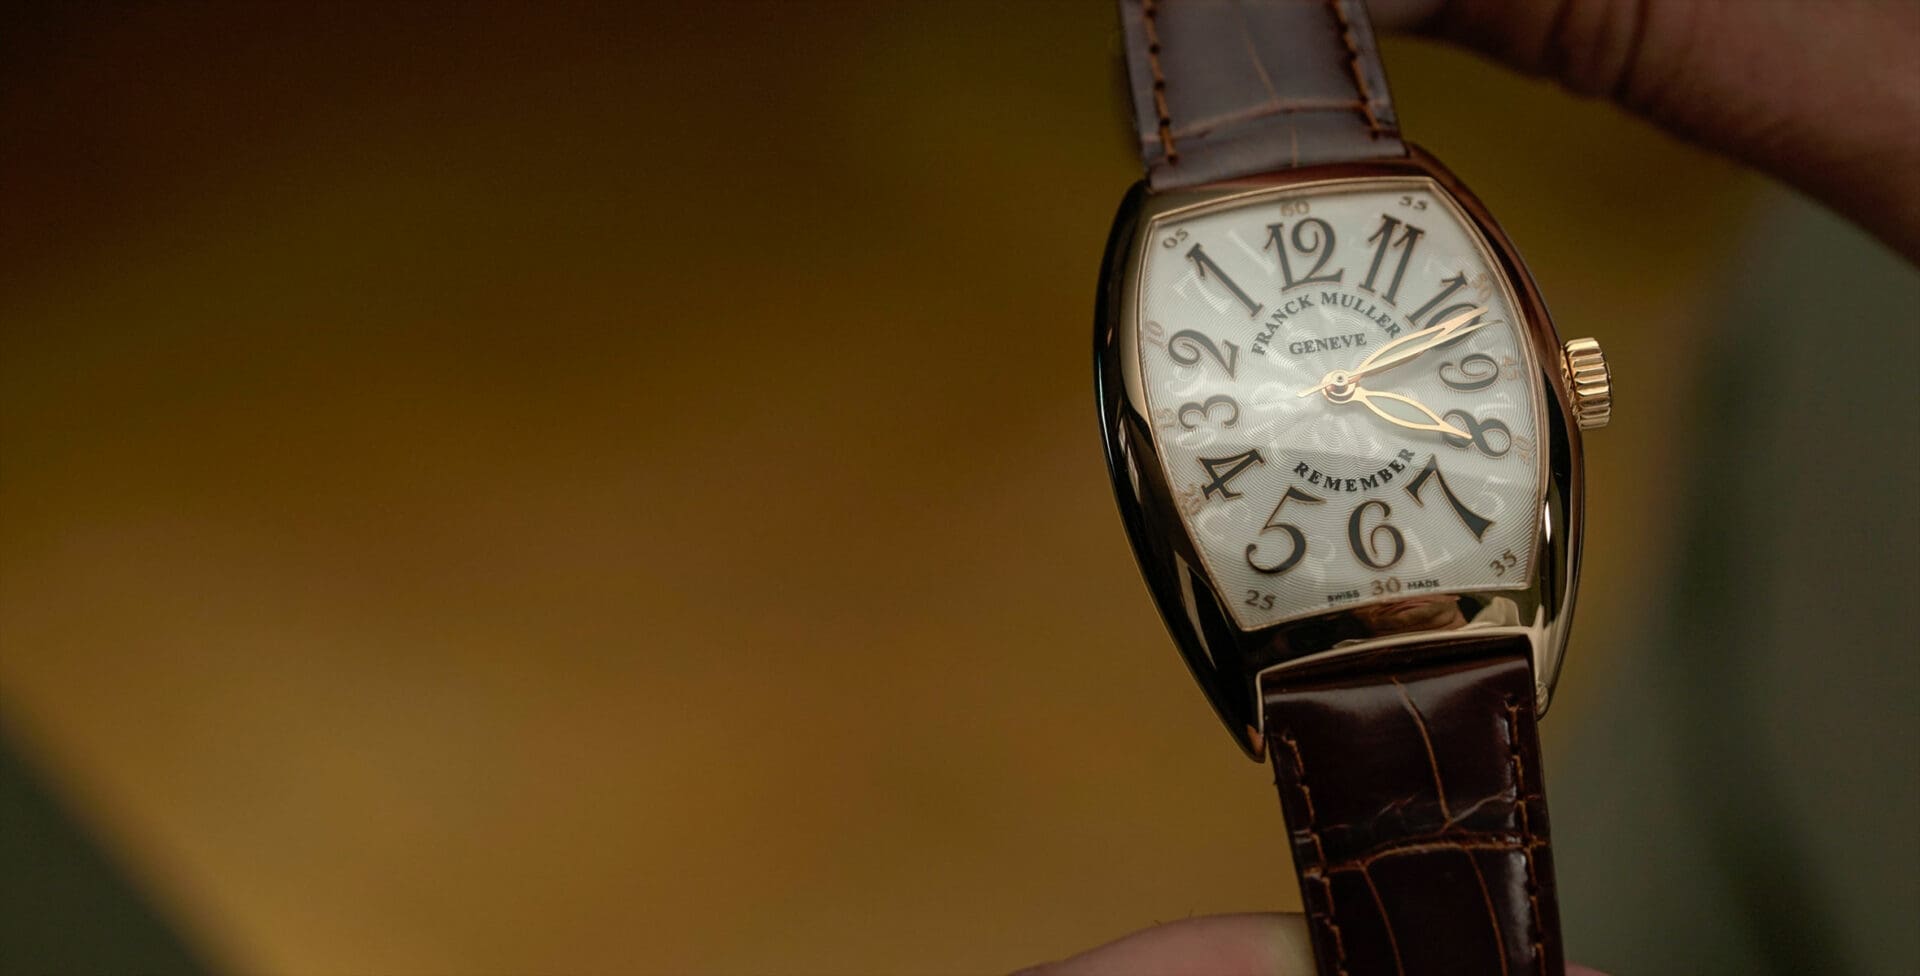 Our 5 favourite Franck Muller watches from the new 2019 collection, with a focus on the crazy ones